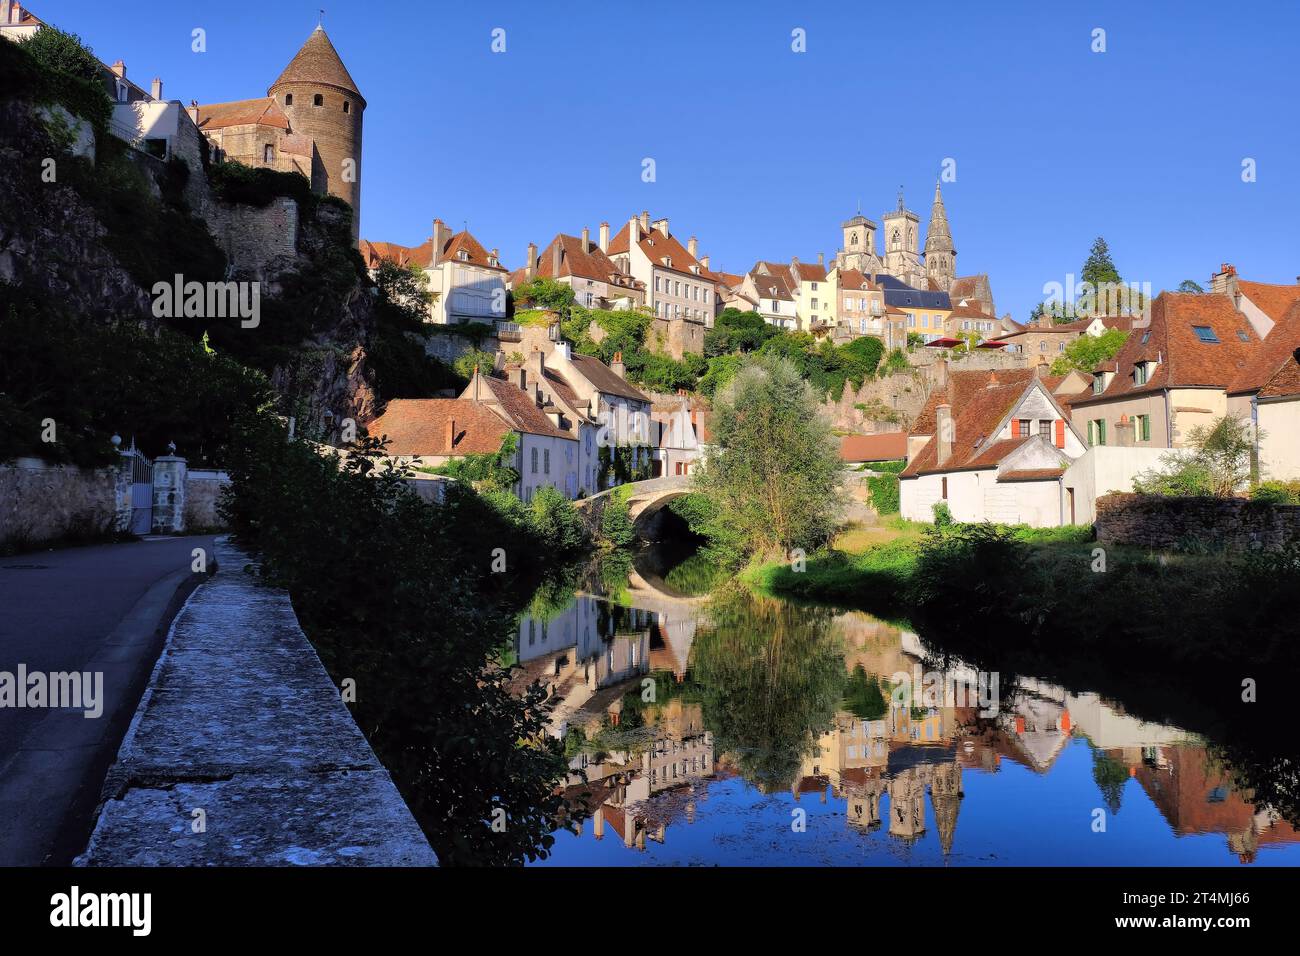 Semur-en-Auxois: Pont Pinard bridge, church and tower soon before sunset with mirror reflections in River Armançon, Burgundy, France Stock Photo